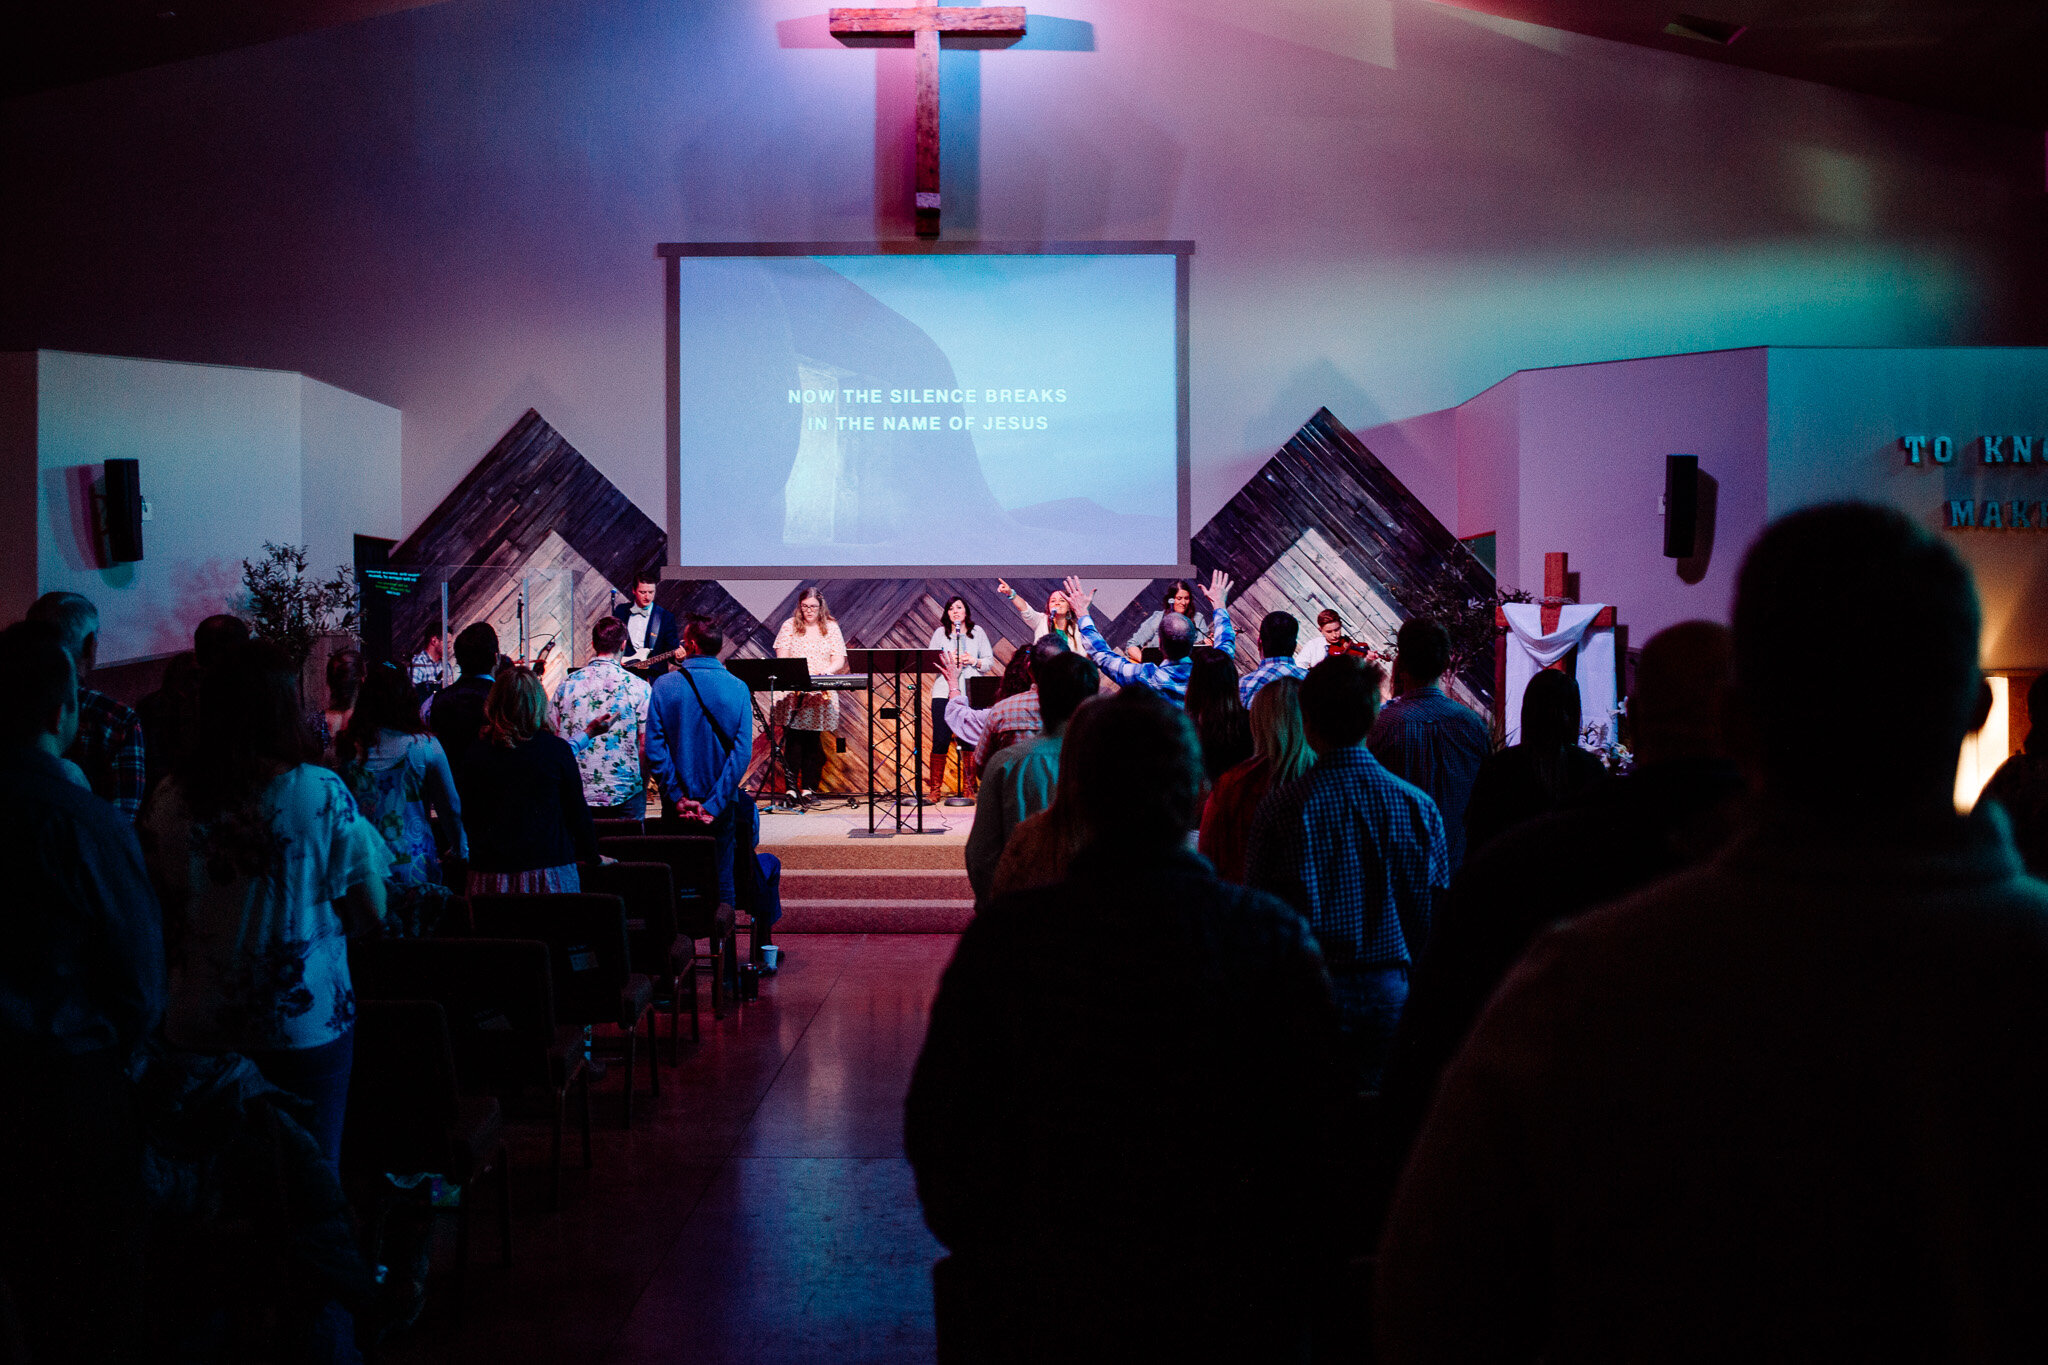 Thank you for a great morning Big Sky celebrating our Risen Christ this Easter. As Pastor Michael said today, the resurrection changes EVERYTHING! We hope that you can allow this truth to shape every aspect of your life.